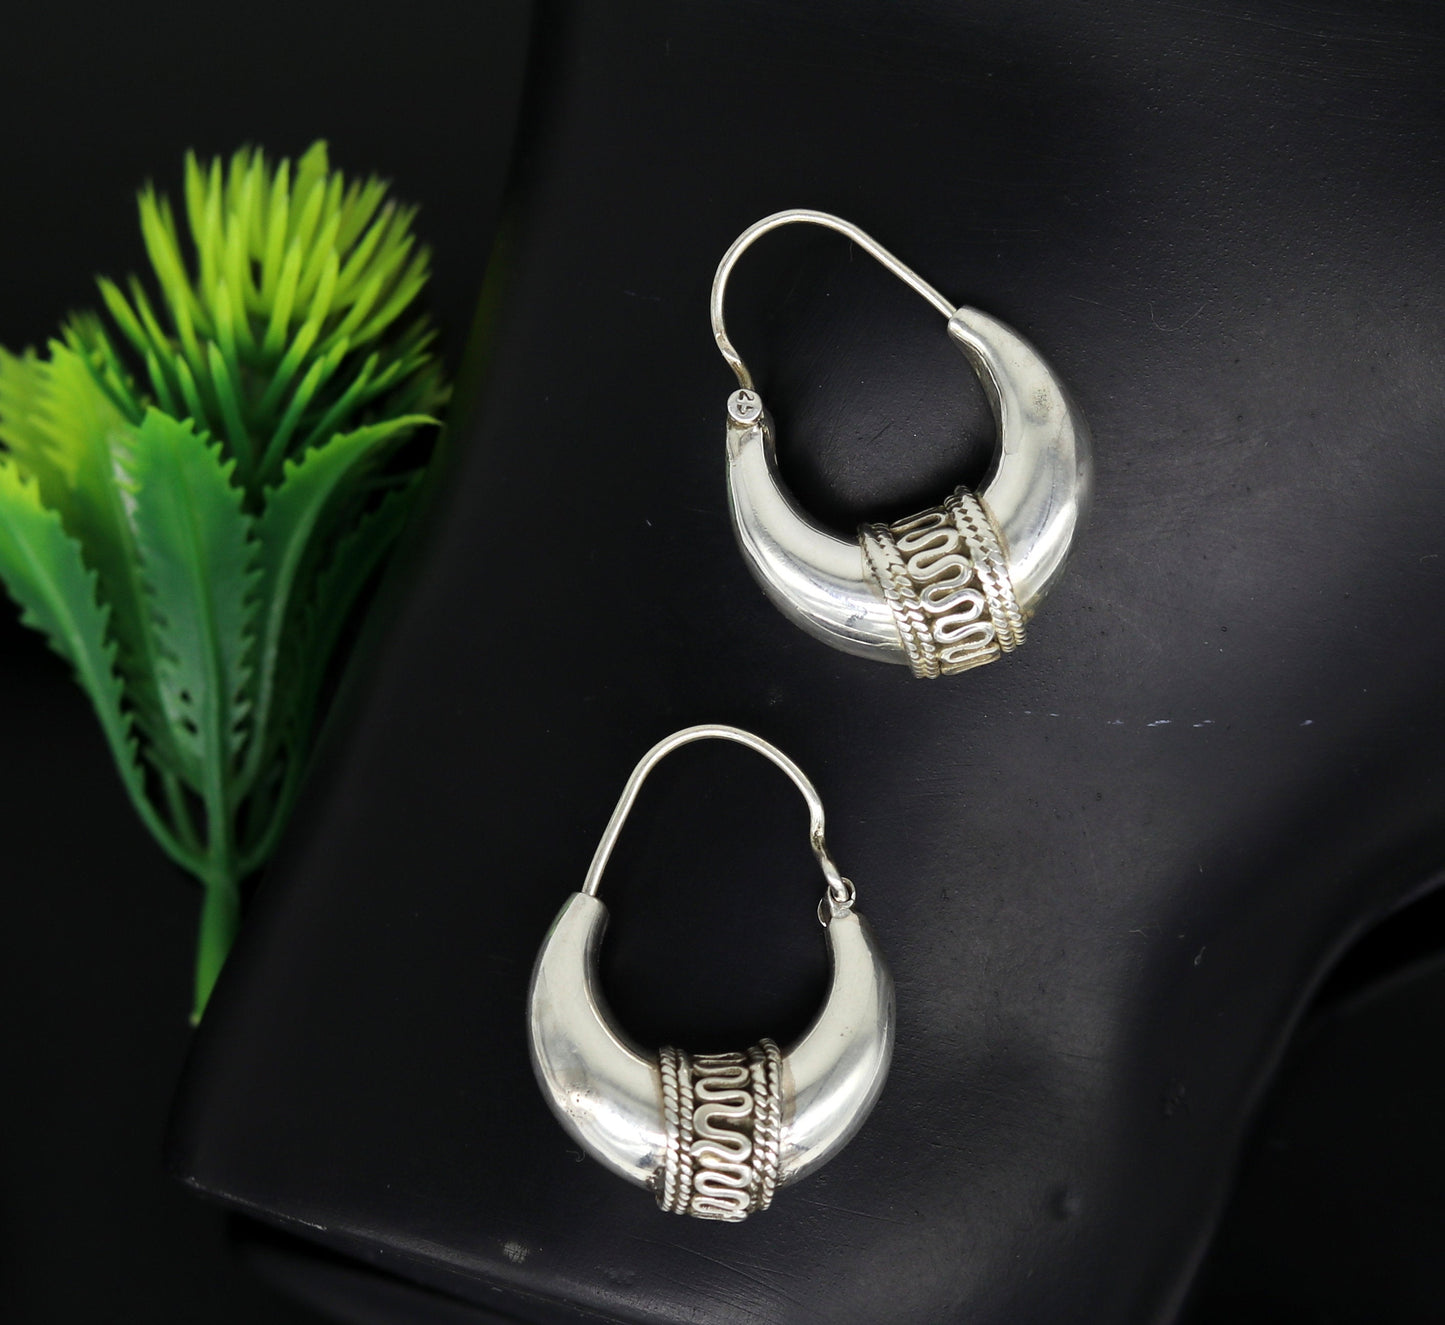 925 sterling silver handmade hoops stud earring bali, excellent customized stylish belly dance personalized gift tribal ethnic jewelry ske10 - TRIBAL ORNAMENTS